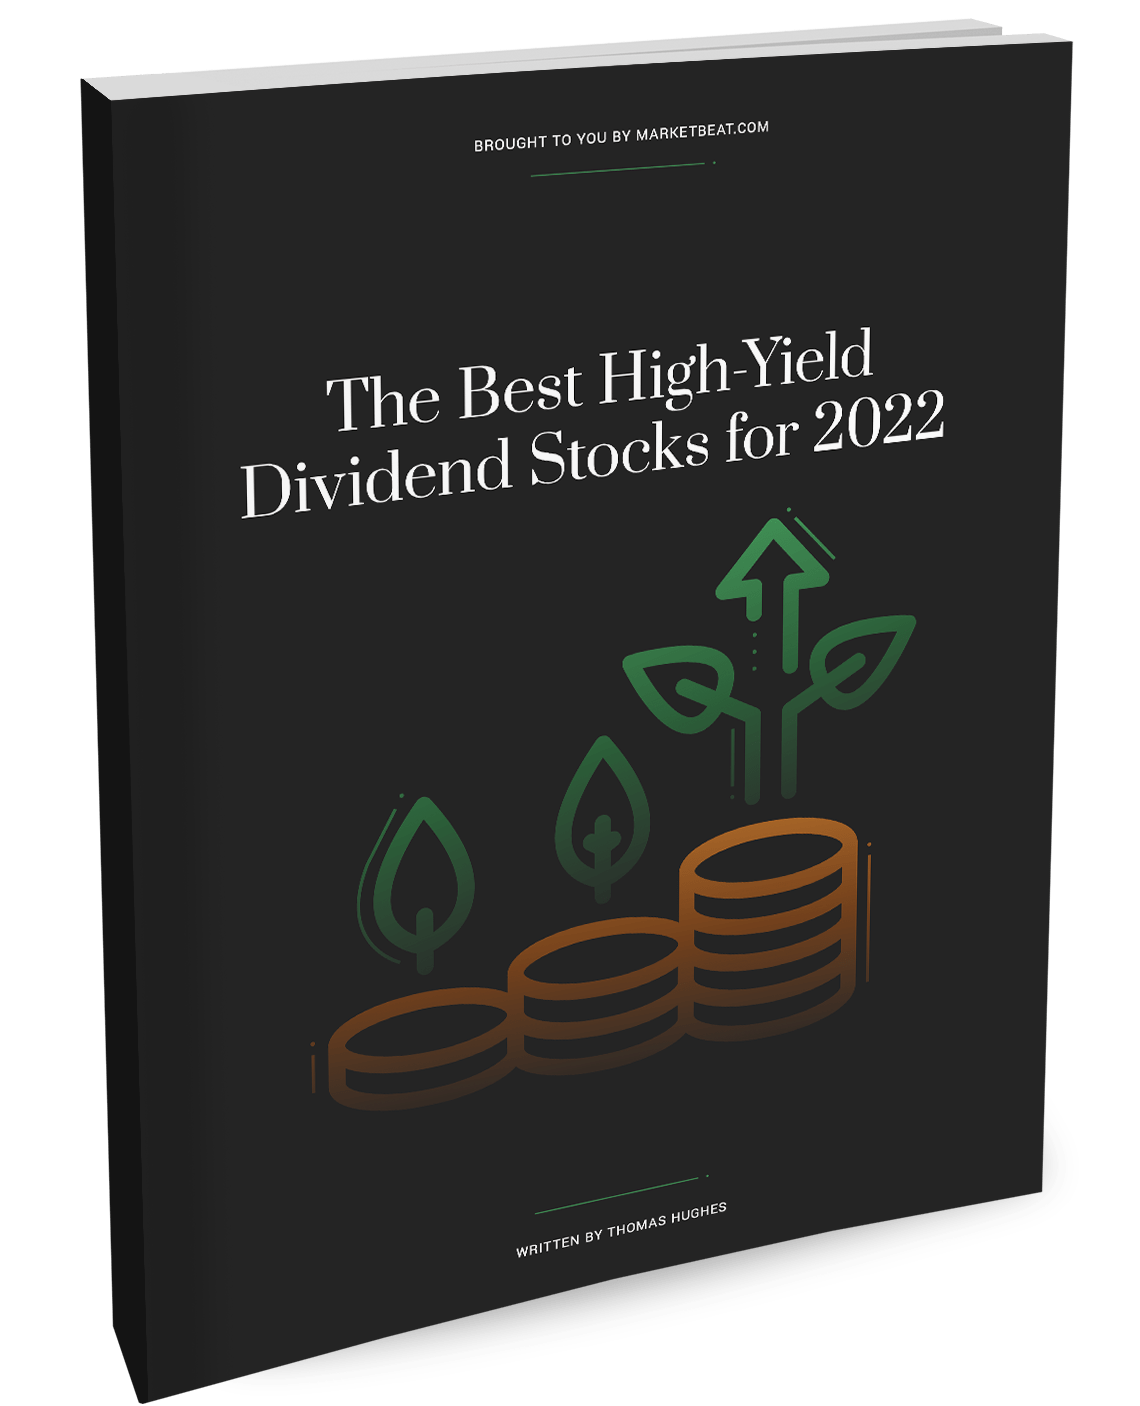 The best high-yielding dividend stocks for the cover of 2022